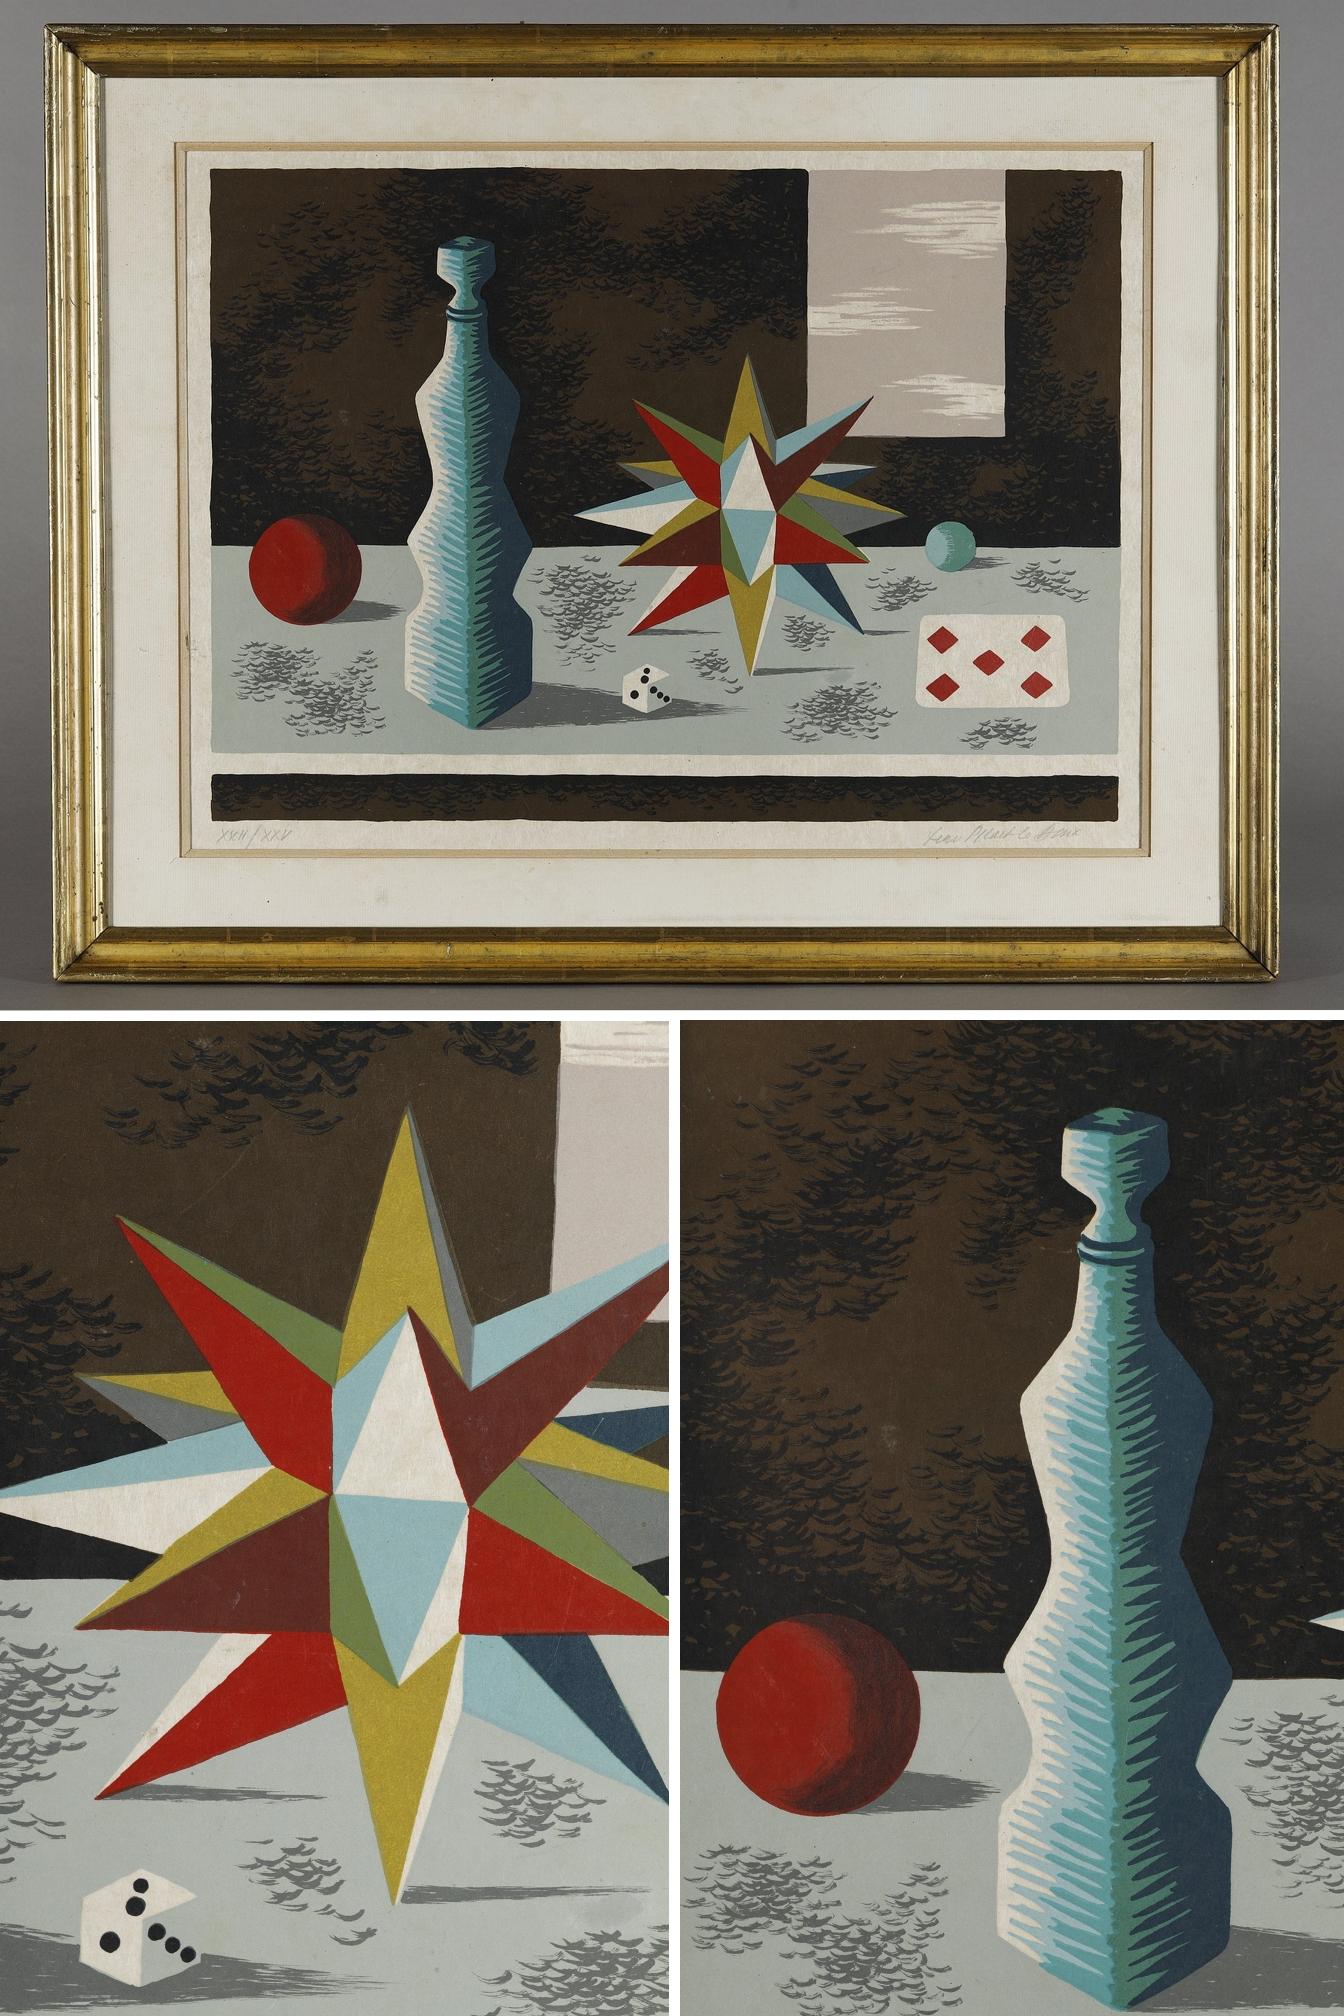 Original colored lithograph on japanese paper, countersigned and numbered XXII/XXV by Jean PICART LE DOUX (1902-1982), depicting playful elements, including a five of diamonds and a dice.

He was born in Paris in 1902, and soon abandoned his studies